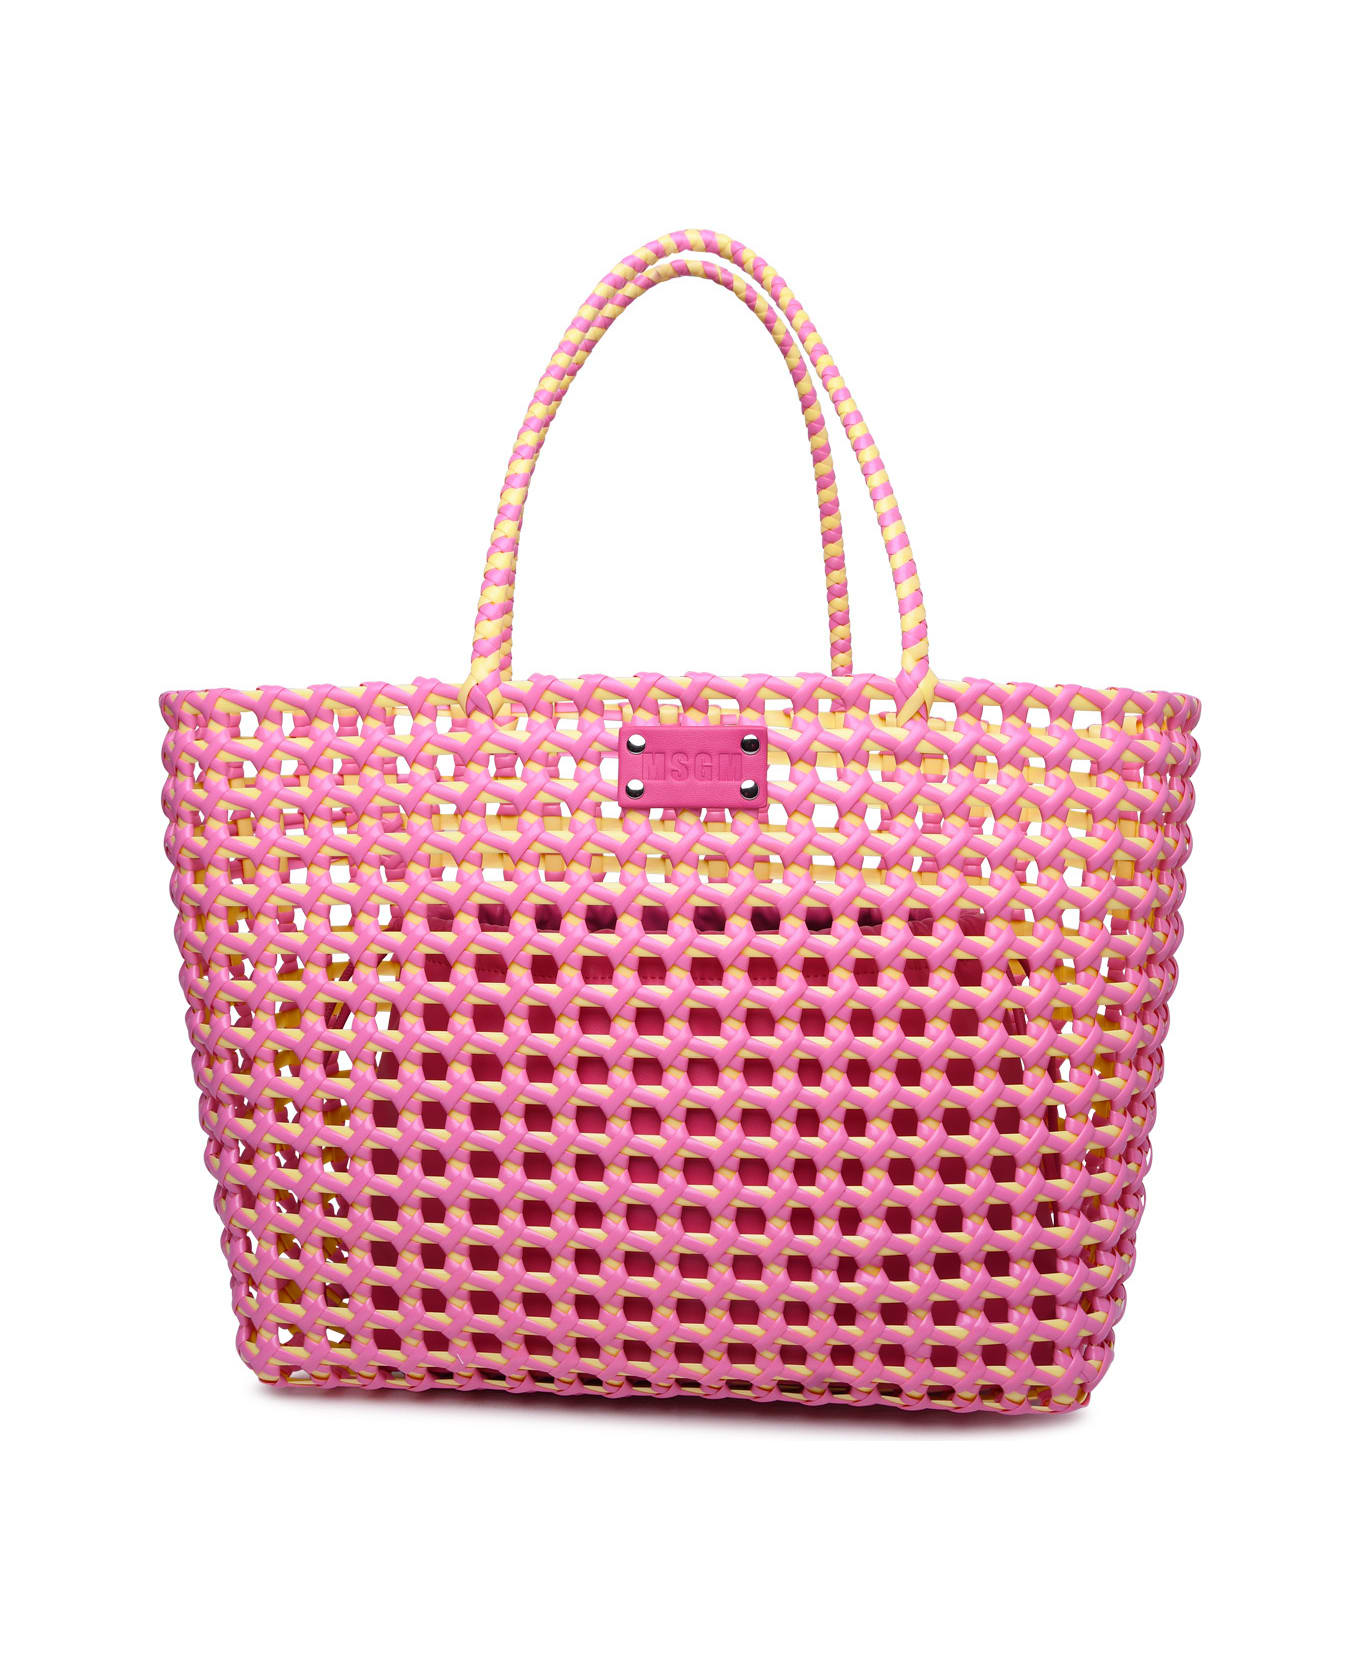 MSGM Large Bag In Two-tone Polyethylene Blend - Pink トートバッグ